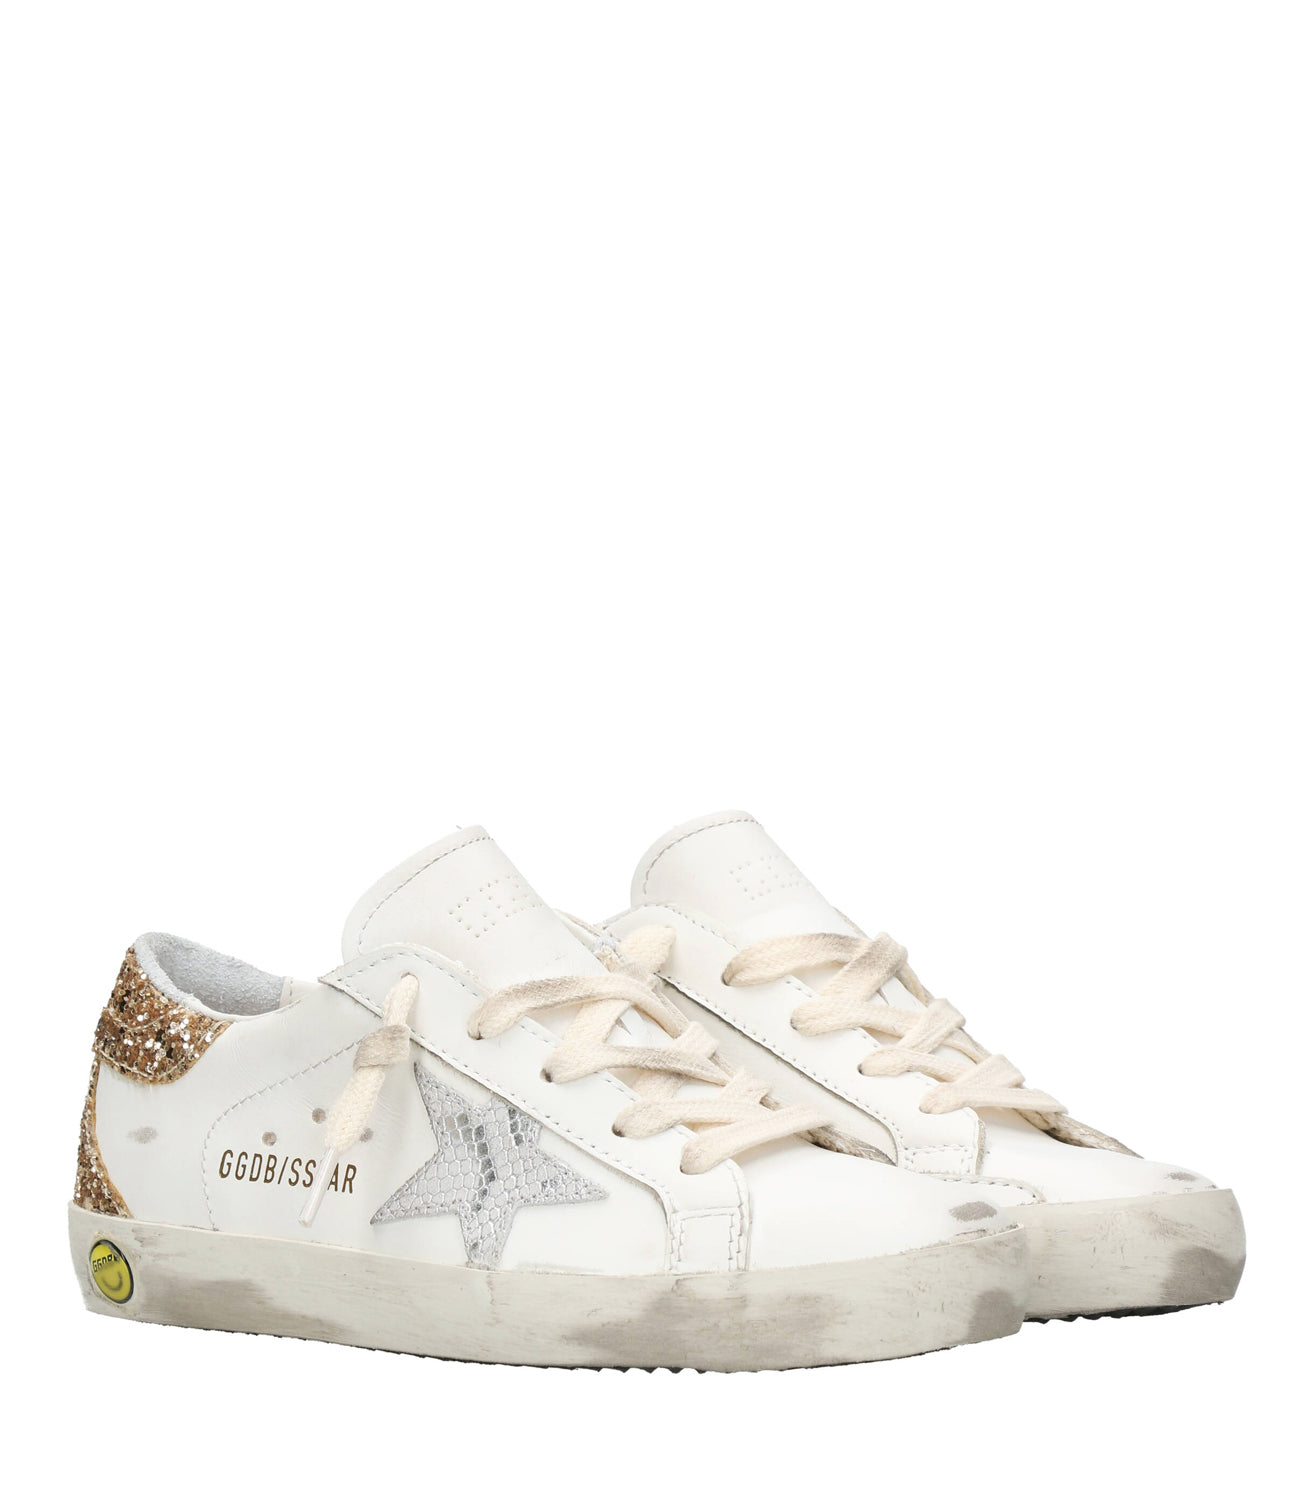 Golden Goose | Superstar Sneakers White, Silver and Gold